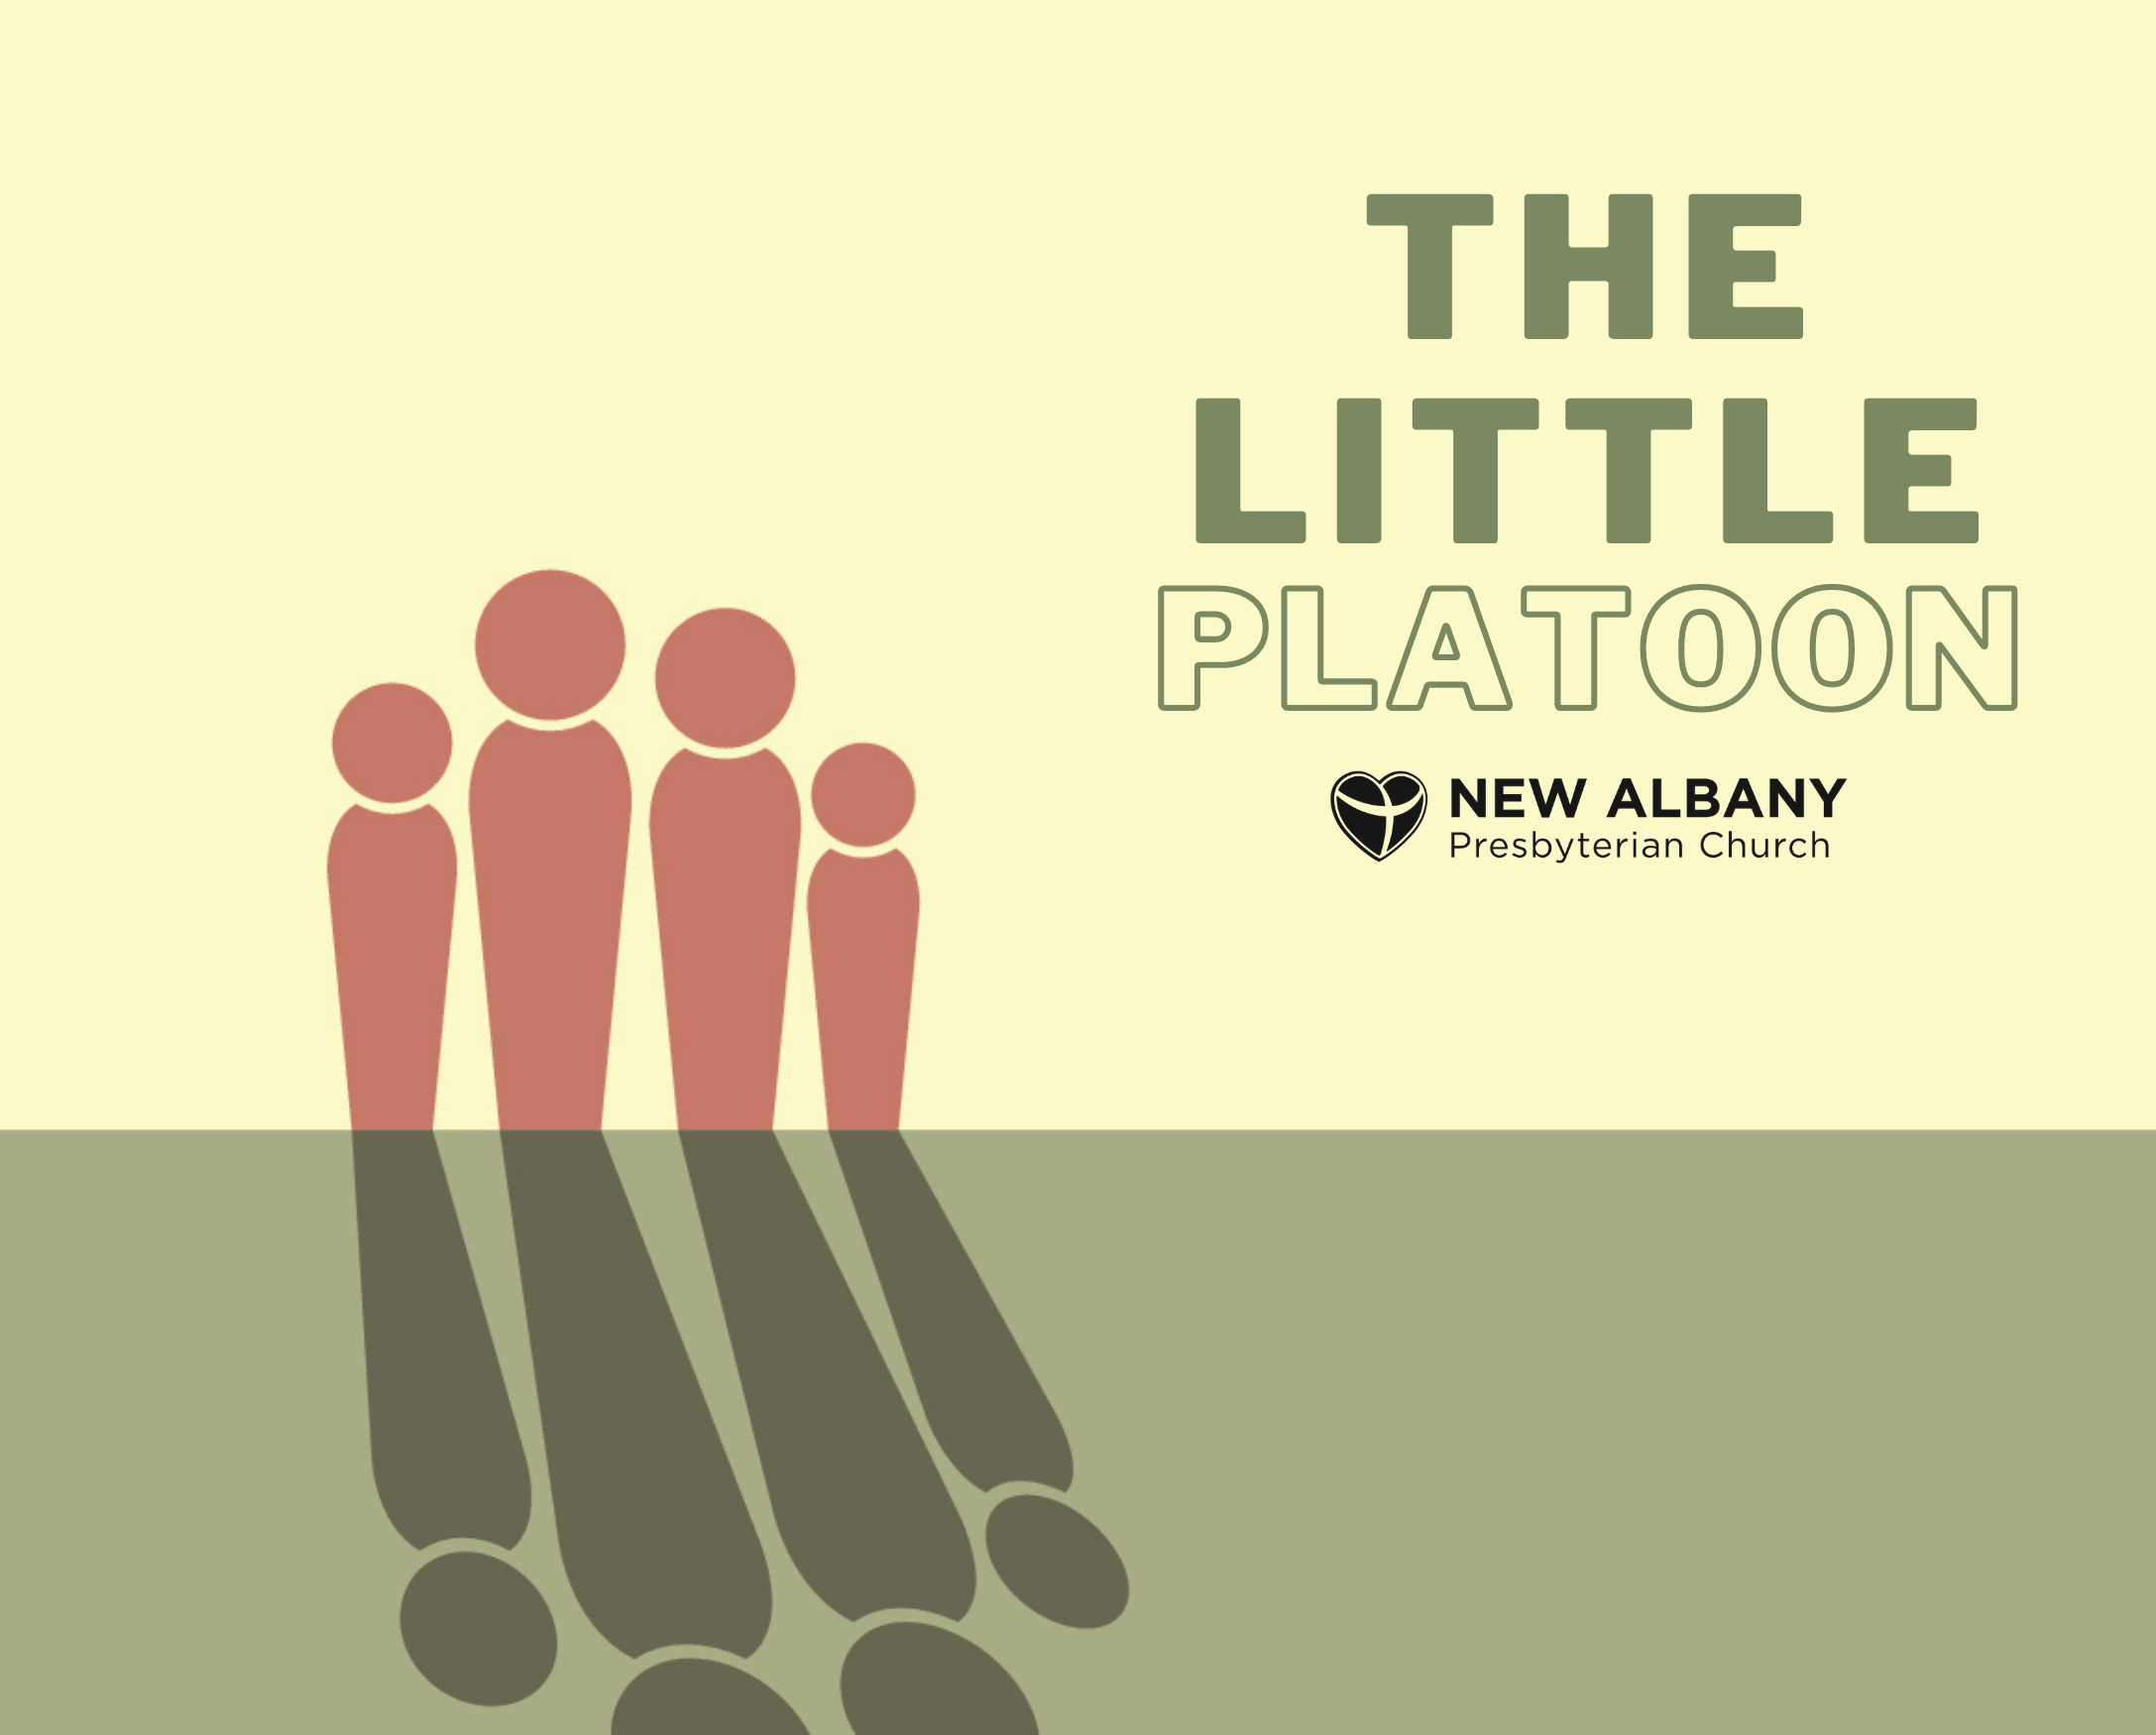 The Little Platoon: Christian Marriage